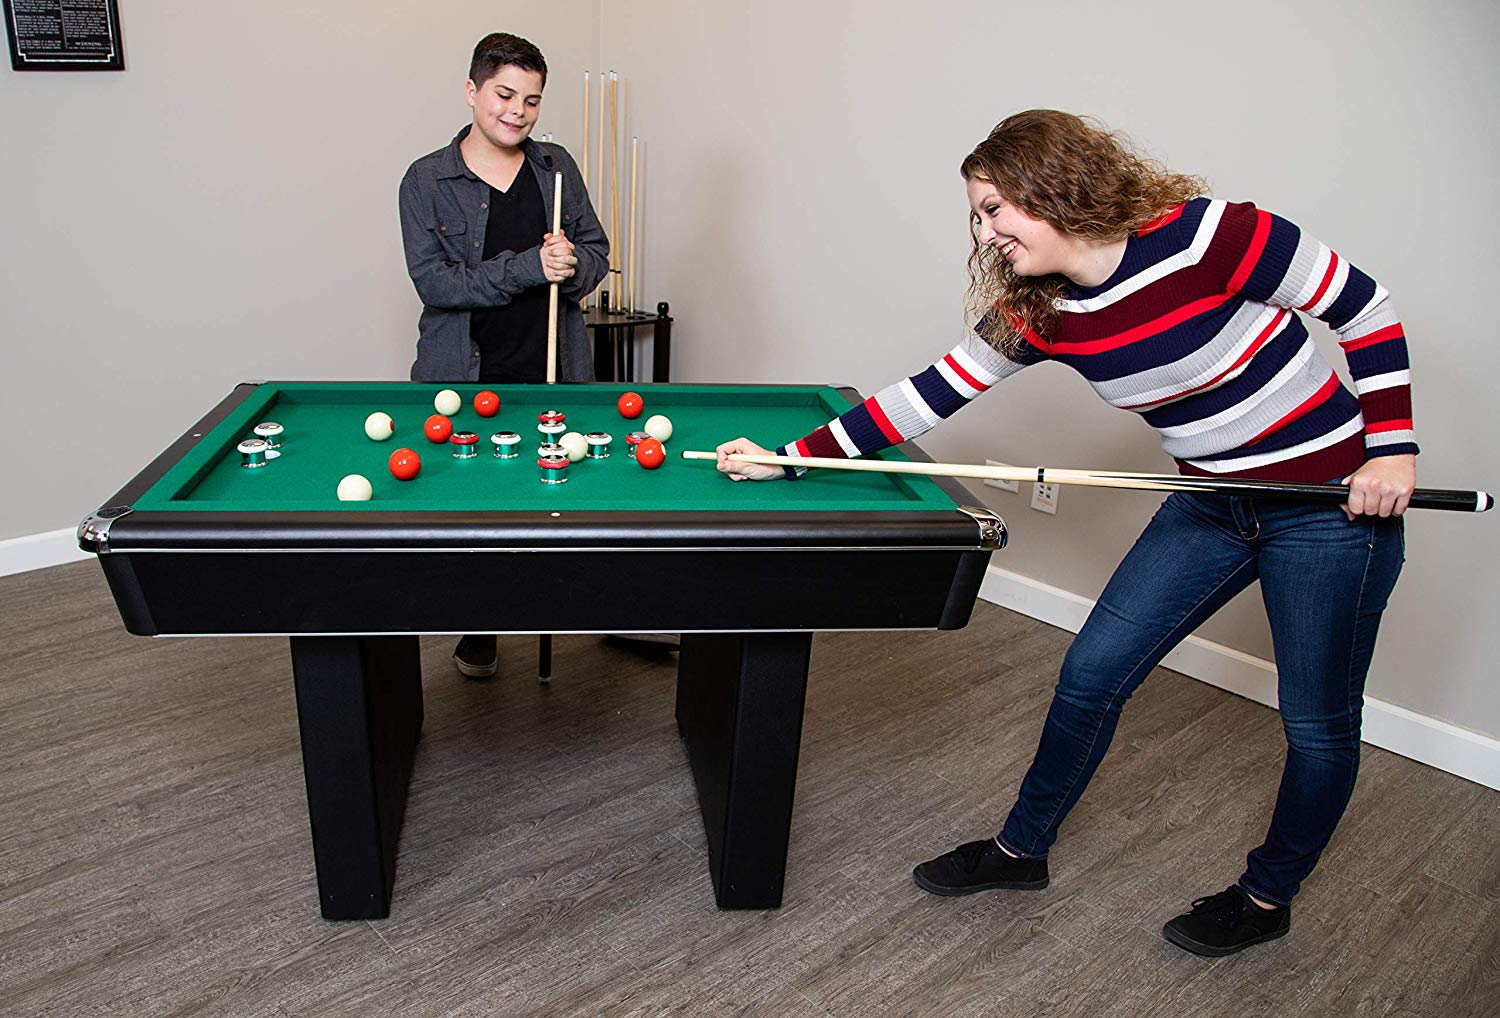 Best Bumper Pool Table: Reviews, Strategy, Buying Guide, and FAQs 2023